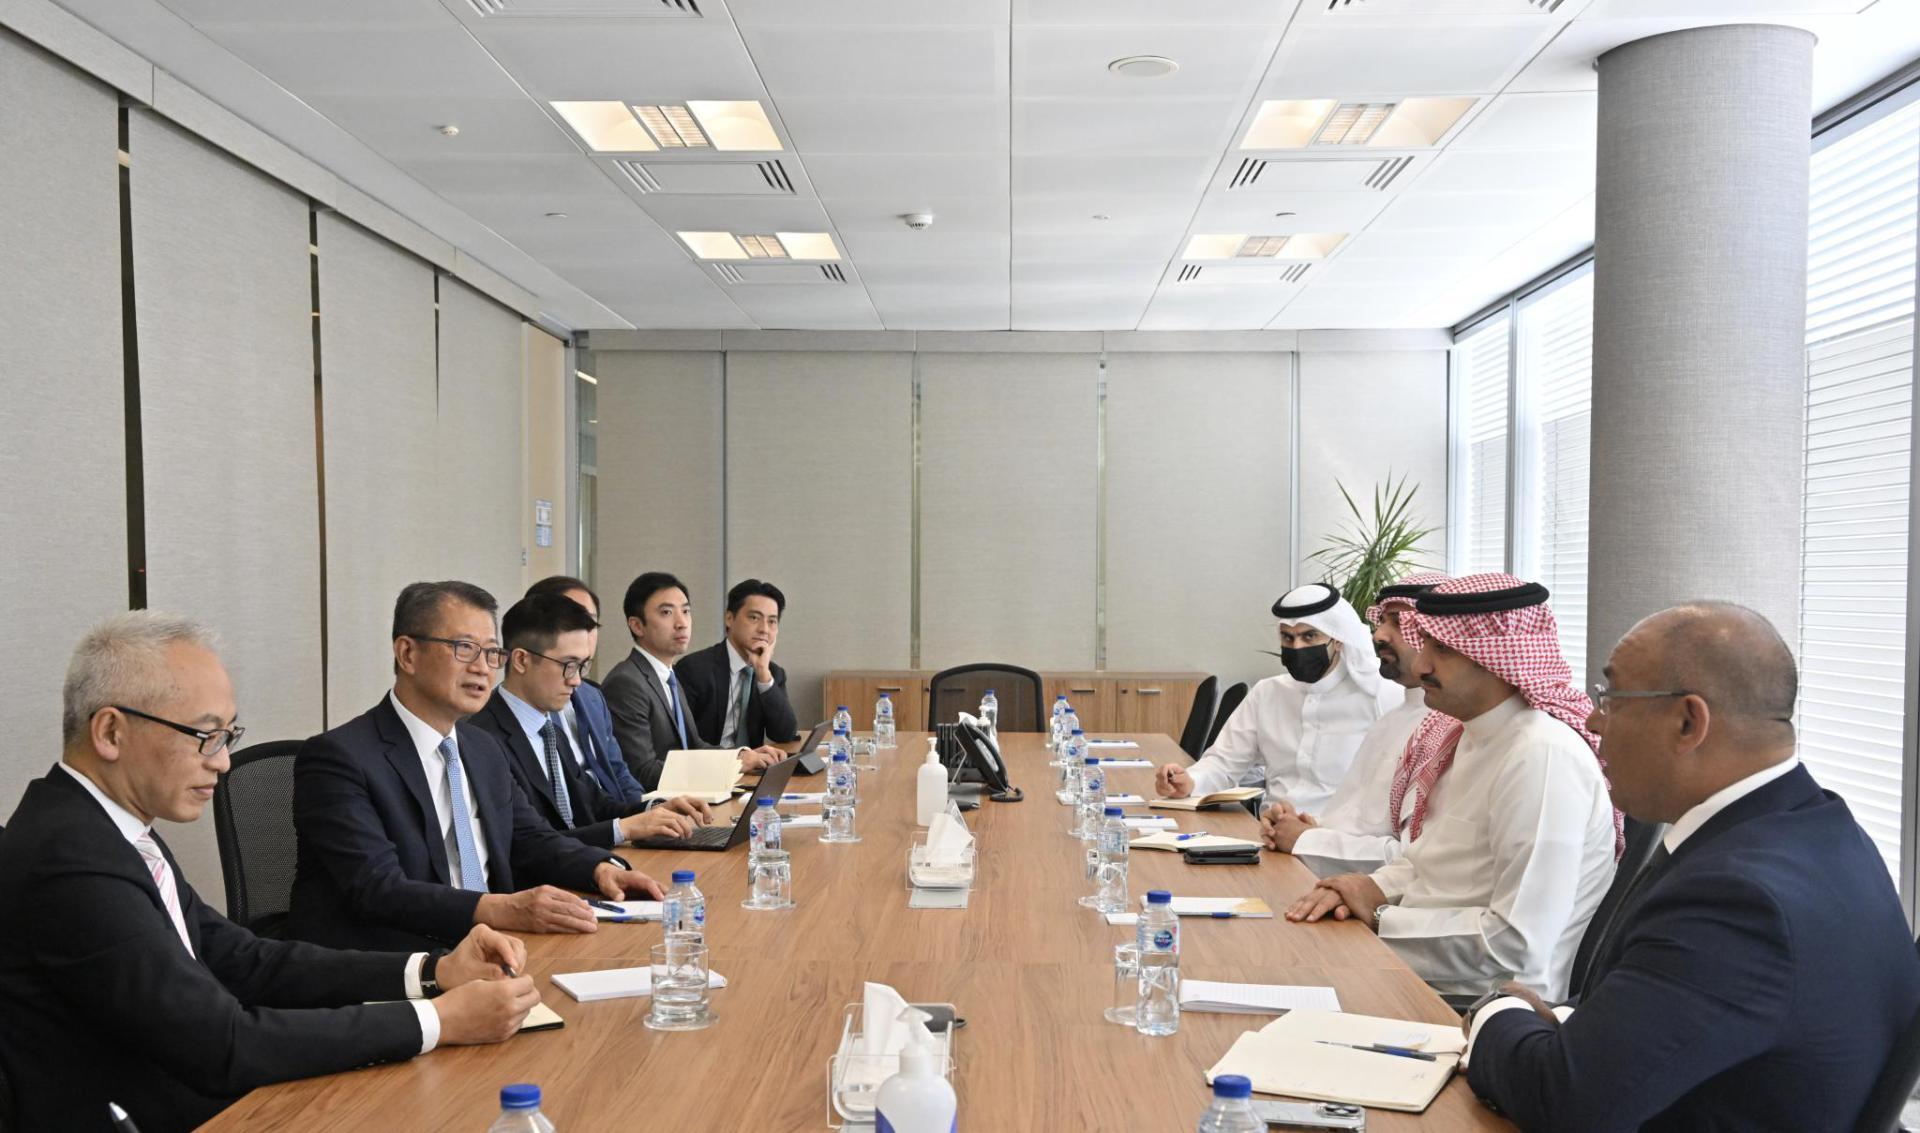 The Financial Secretary, Mr Paul Chan, continued his visit to Bahrain yesterday (October 24, Bahrain time). Photo shows Mr Chan (second left) meeting with the Chief Executive Officer of Osool Asset Management, Sheikh Abdulla bin Khalifa Al Khalifa (second right).